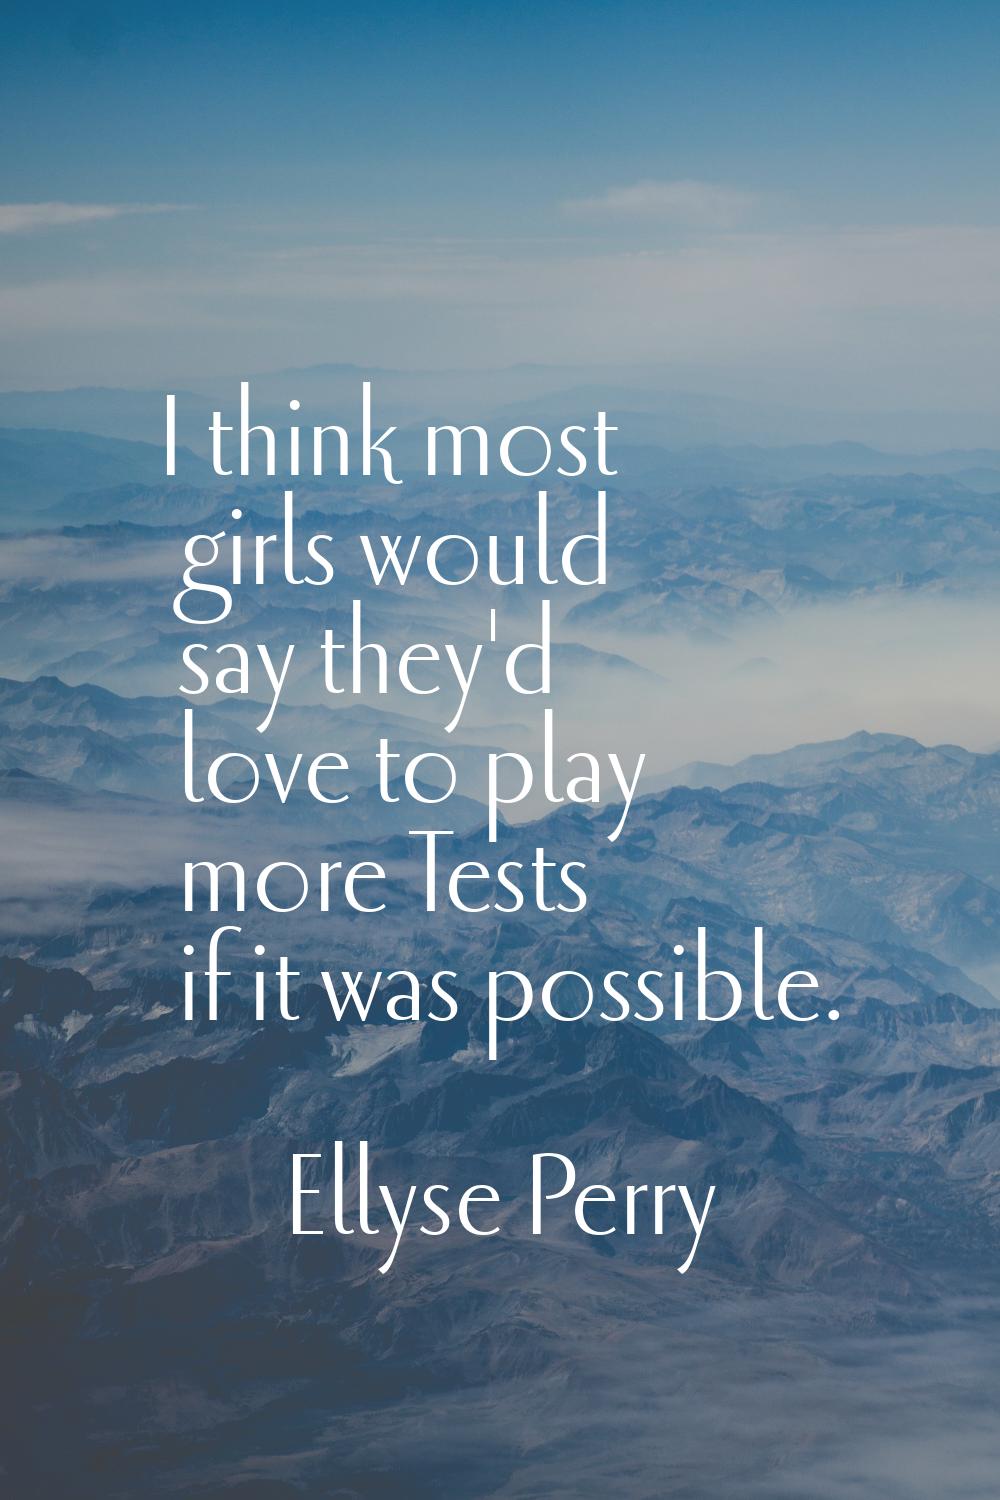 I think most girls would say they'd love to play more Tests if it was possible.